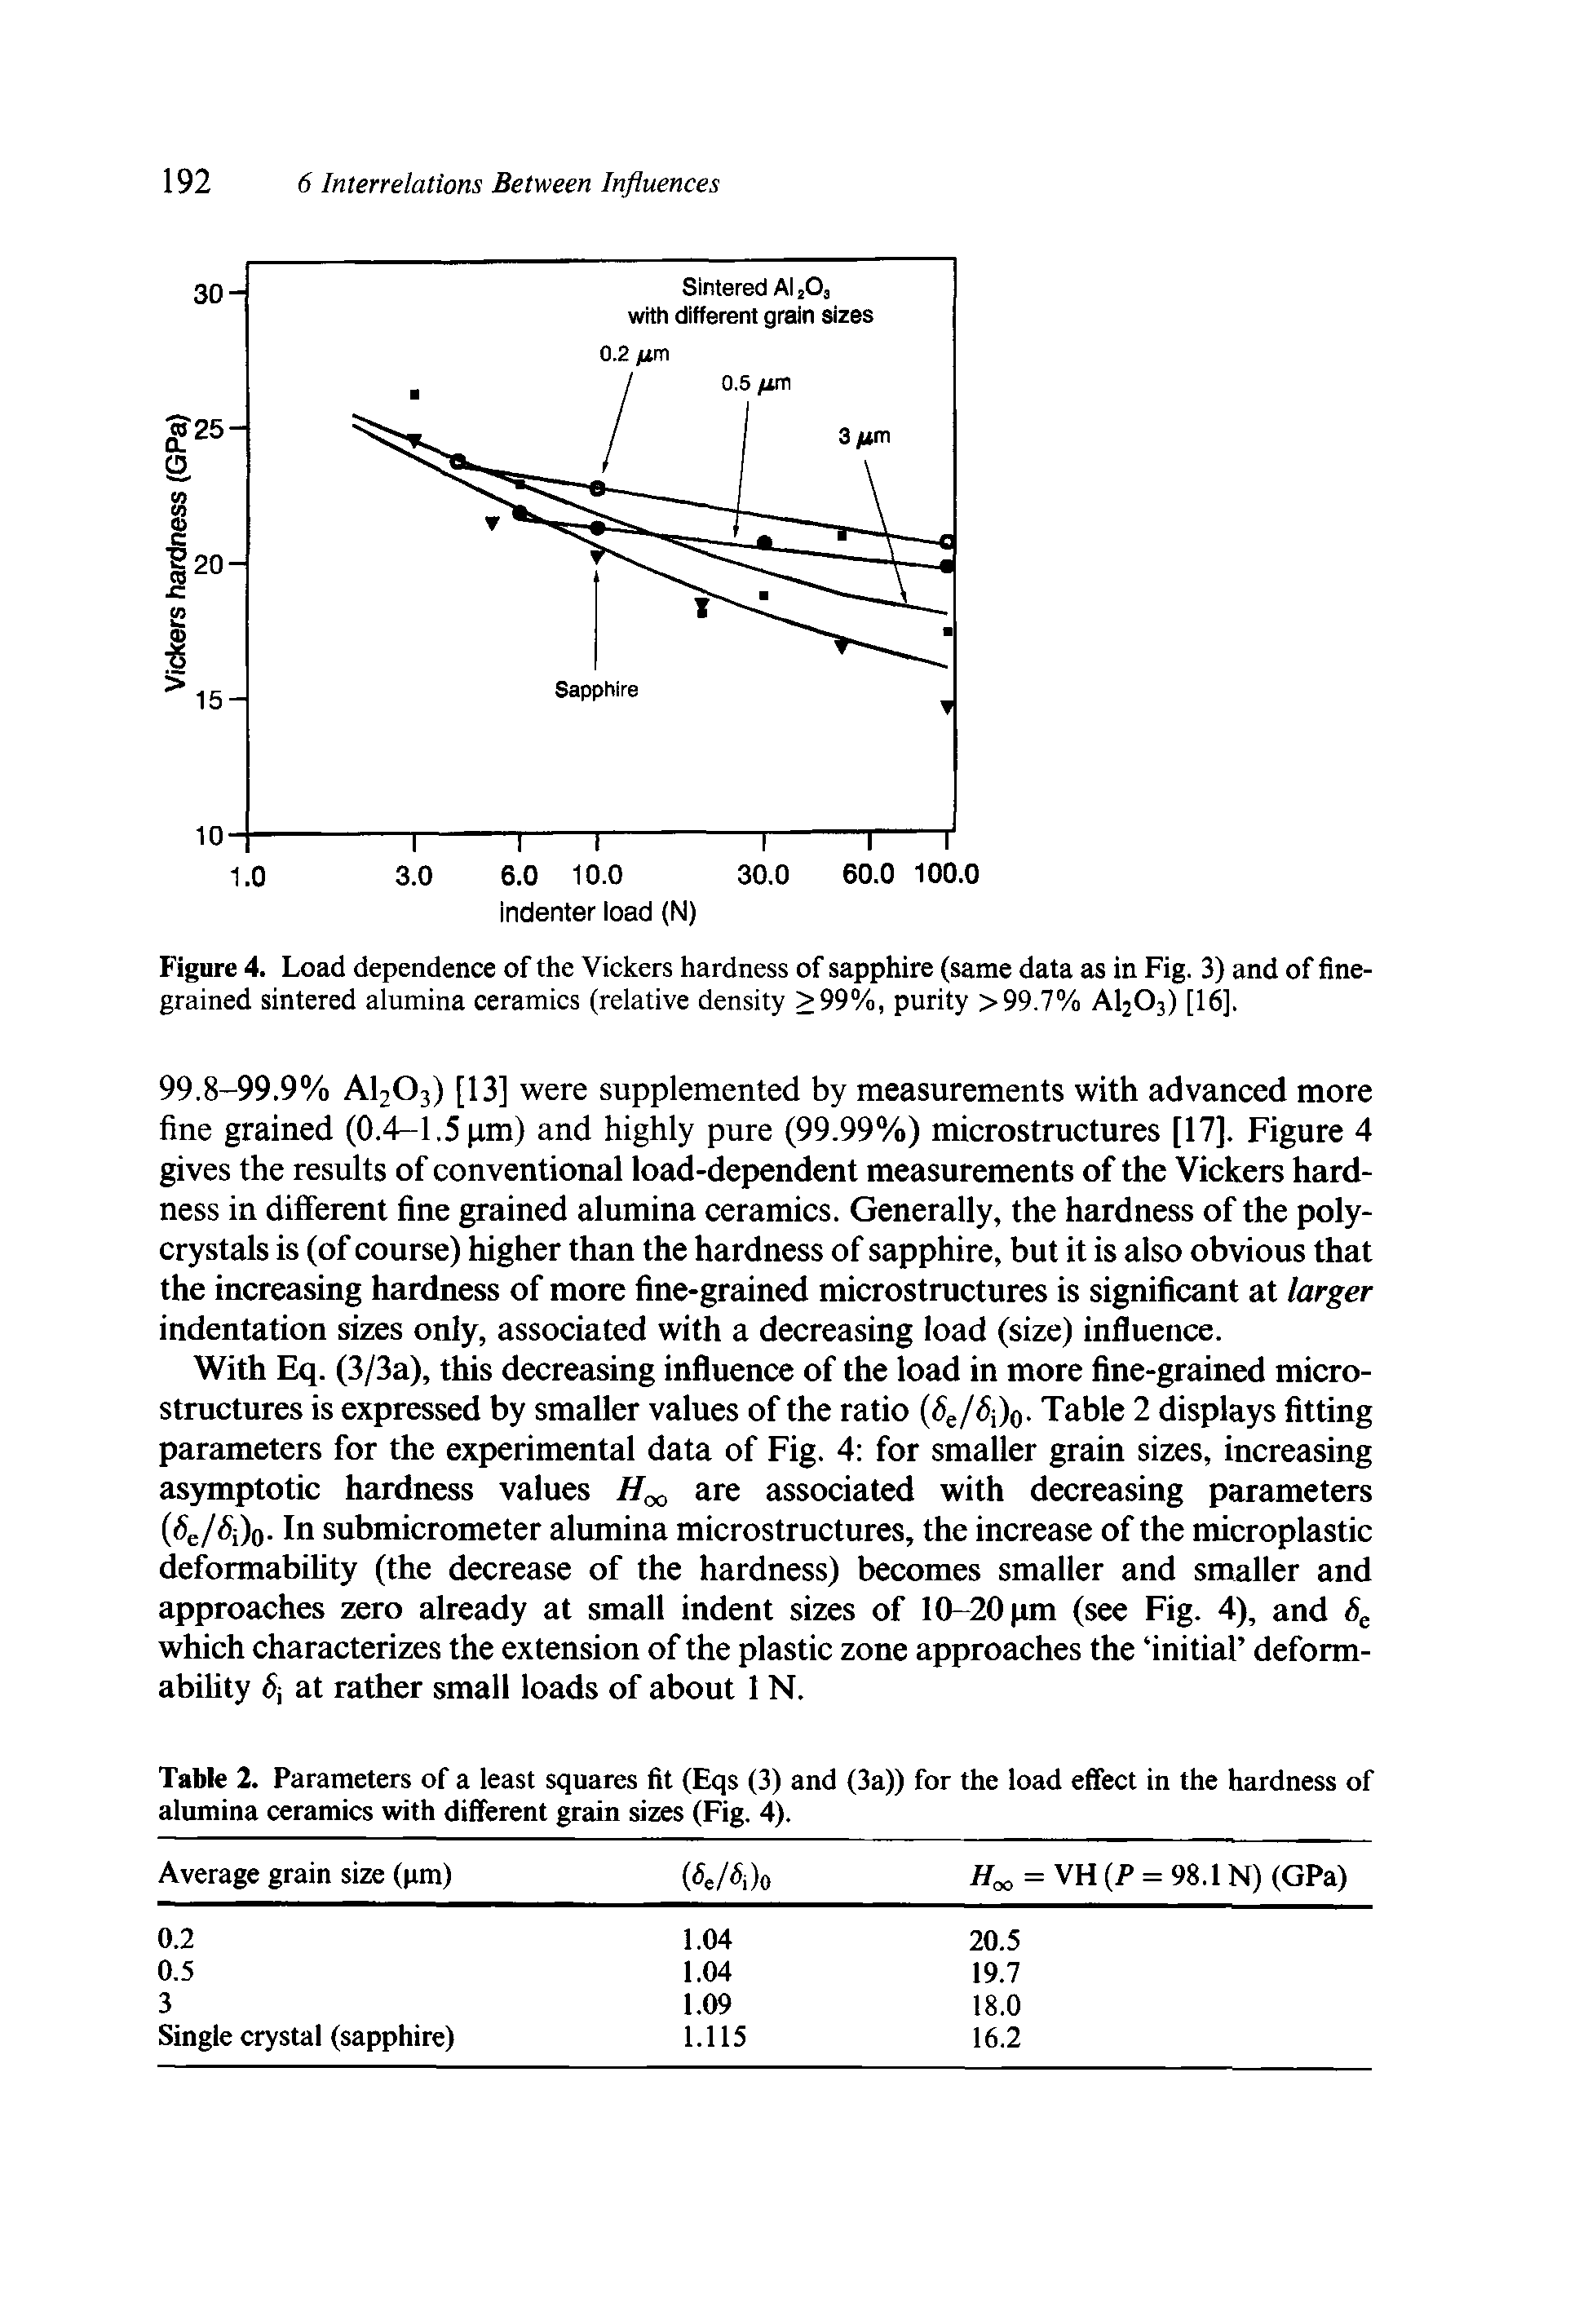 Figure 4. Load dependence of the Vickers hardness of sapphire (same data as in Fig. 3) and of finegrained sintered alumina ceramics (relative density >99%, purity >99.7% AI2O3) [16],...